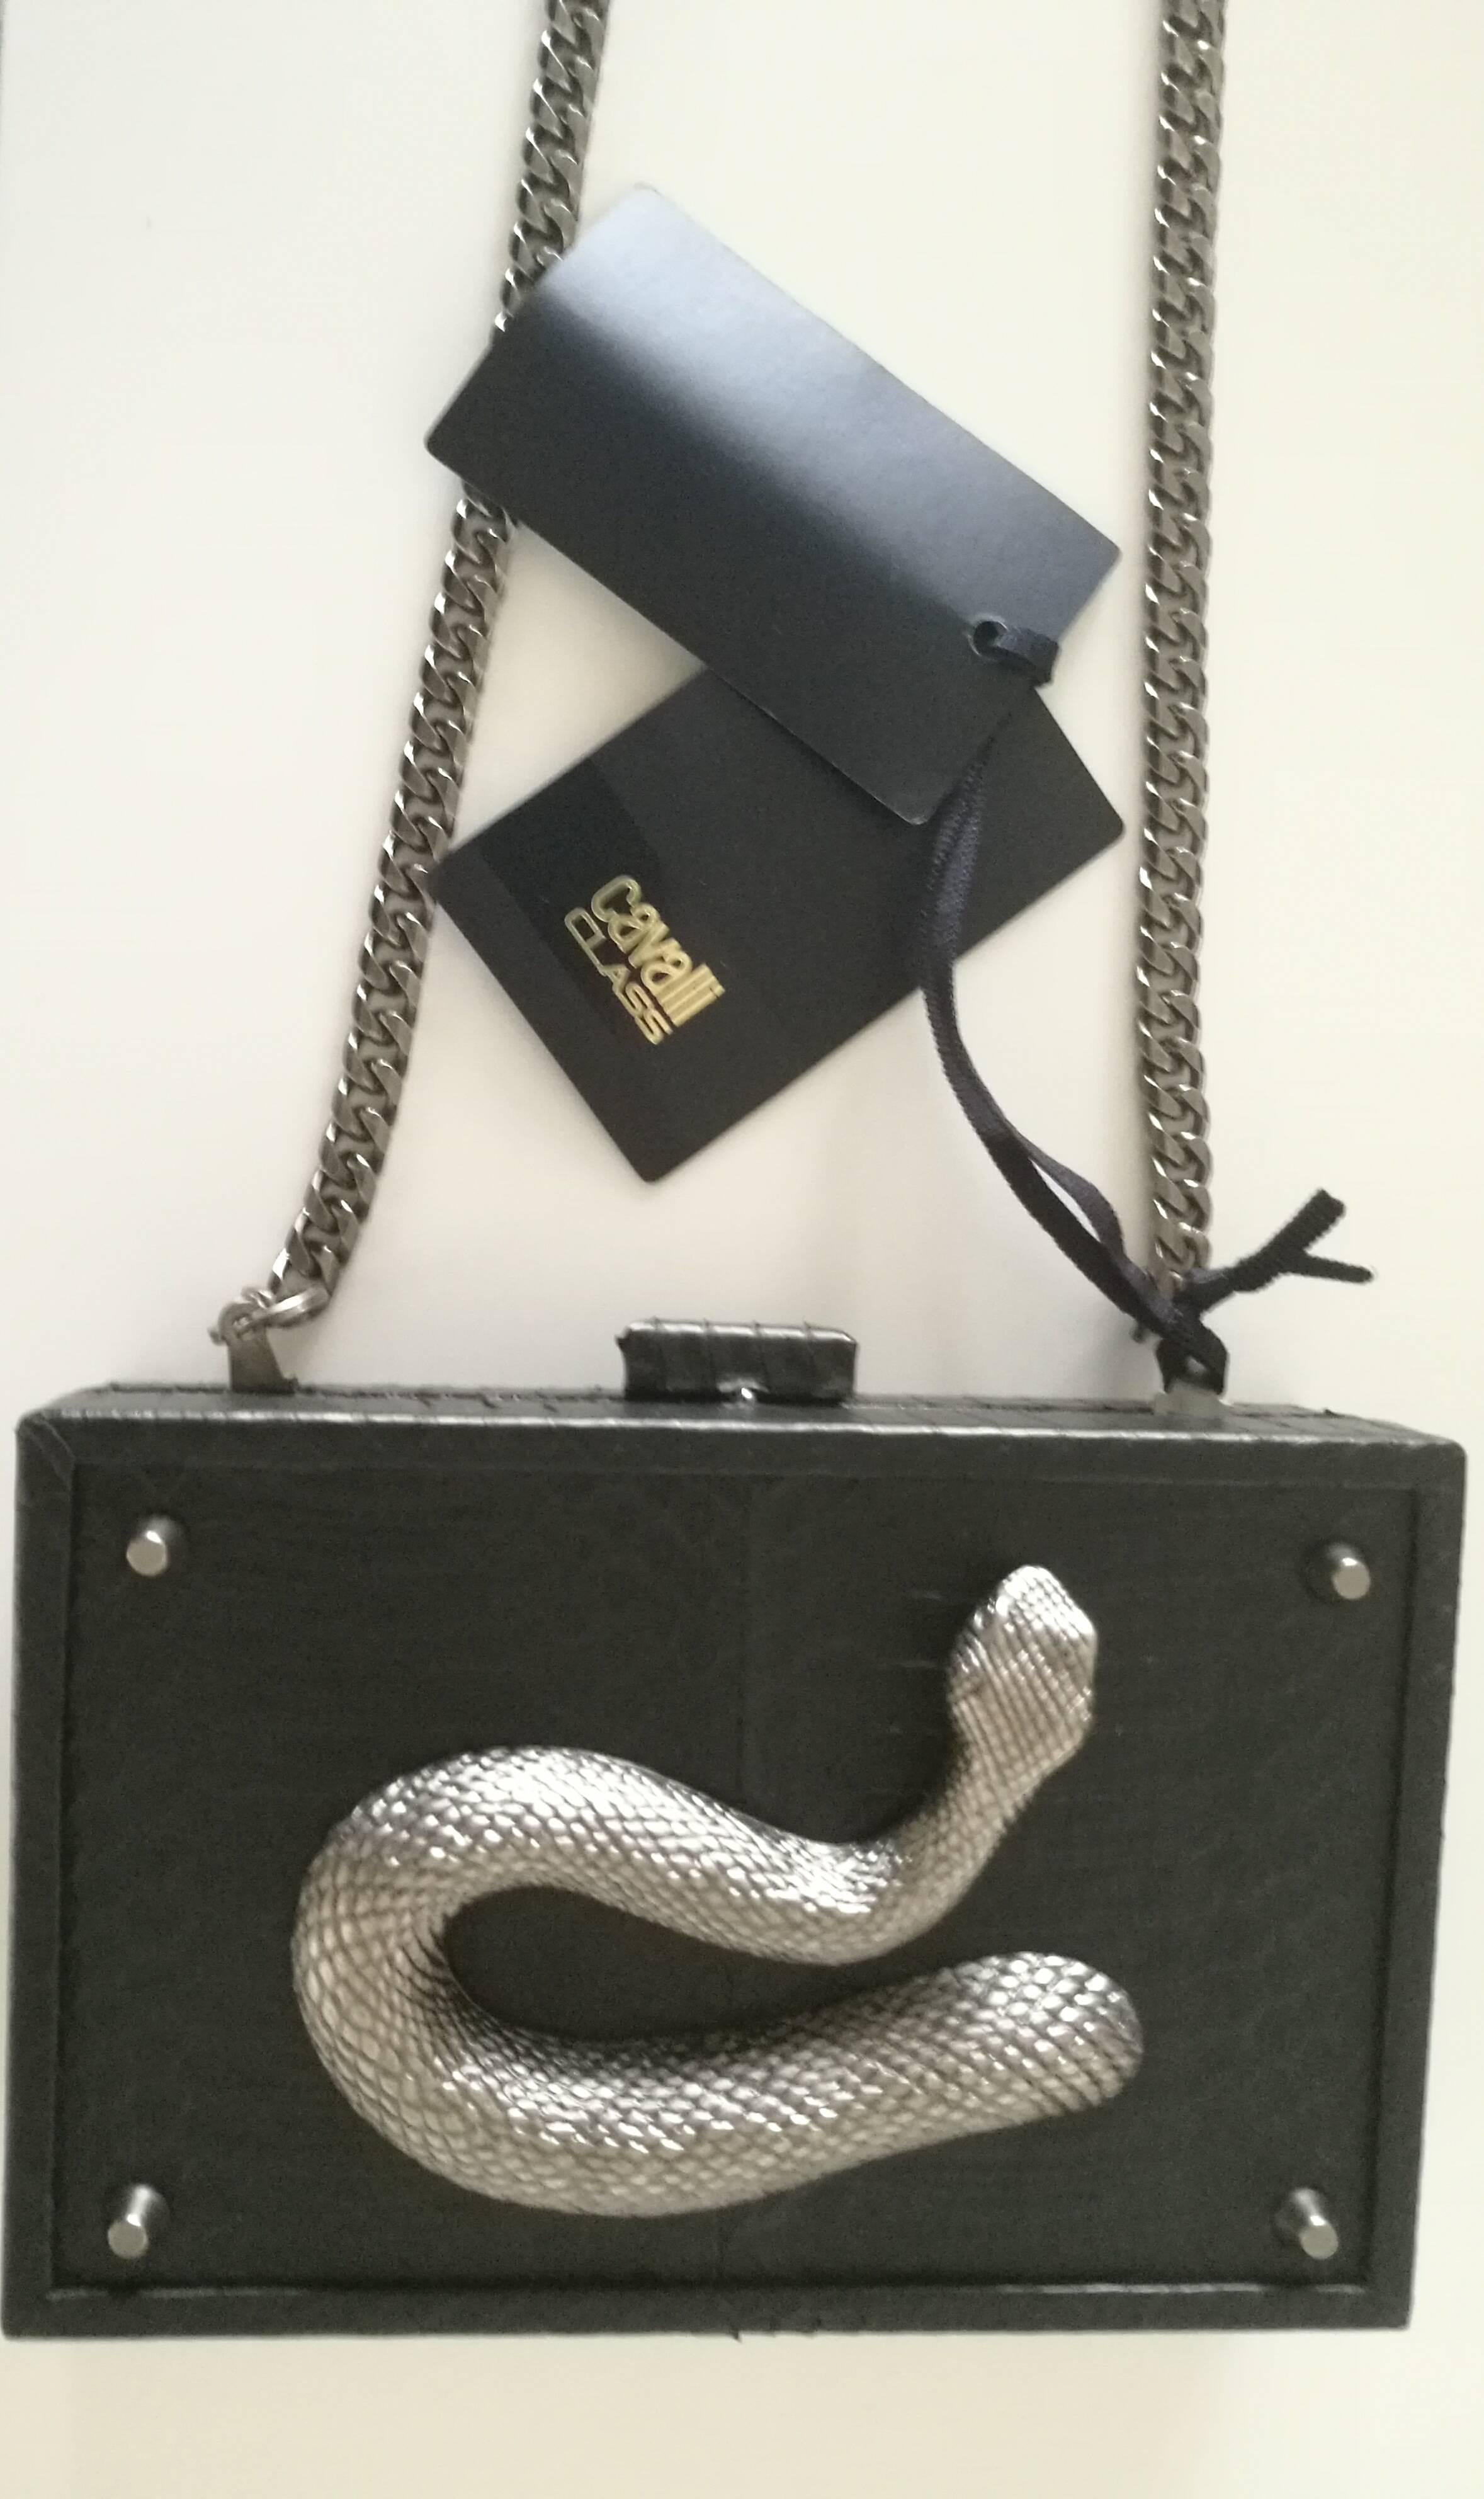 Roberto Cavalli Class Black Snake Skin Clutch NWOT

Silver hardware and silver tone chain with snake on the front 
Still with tags